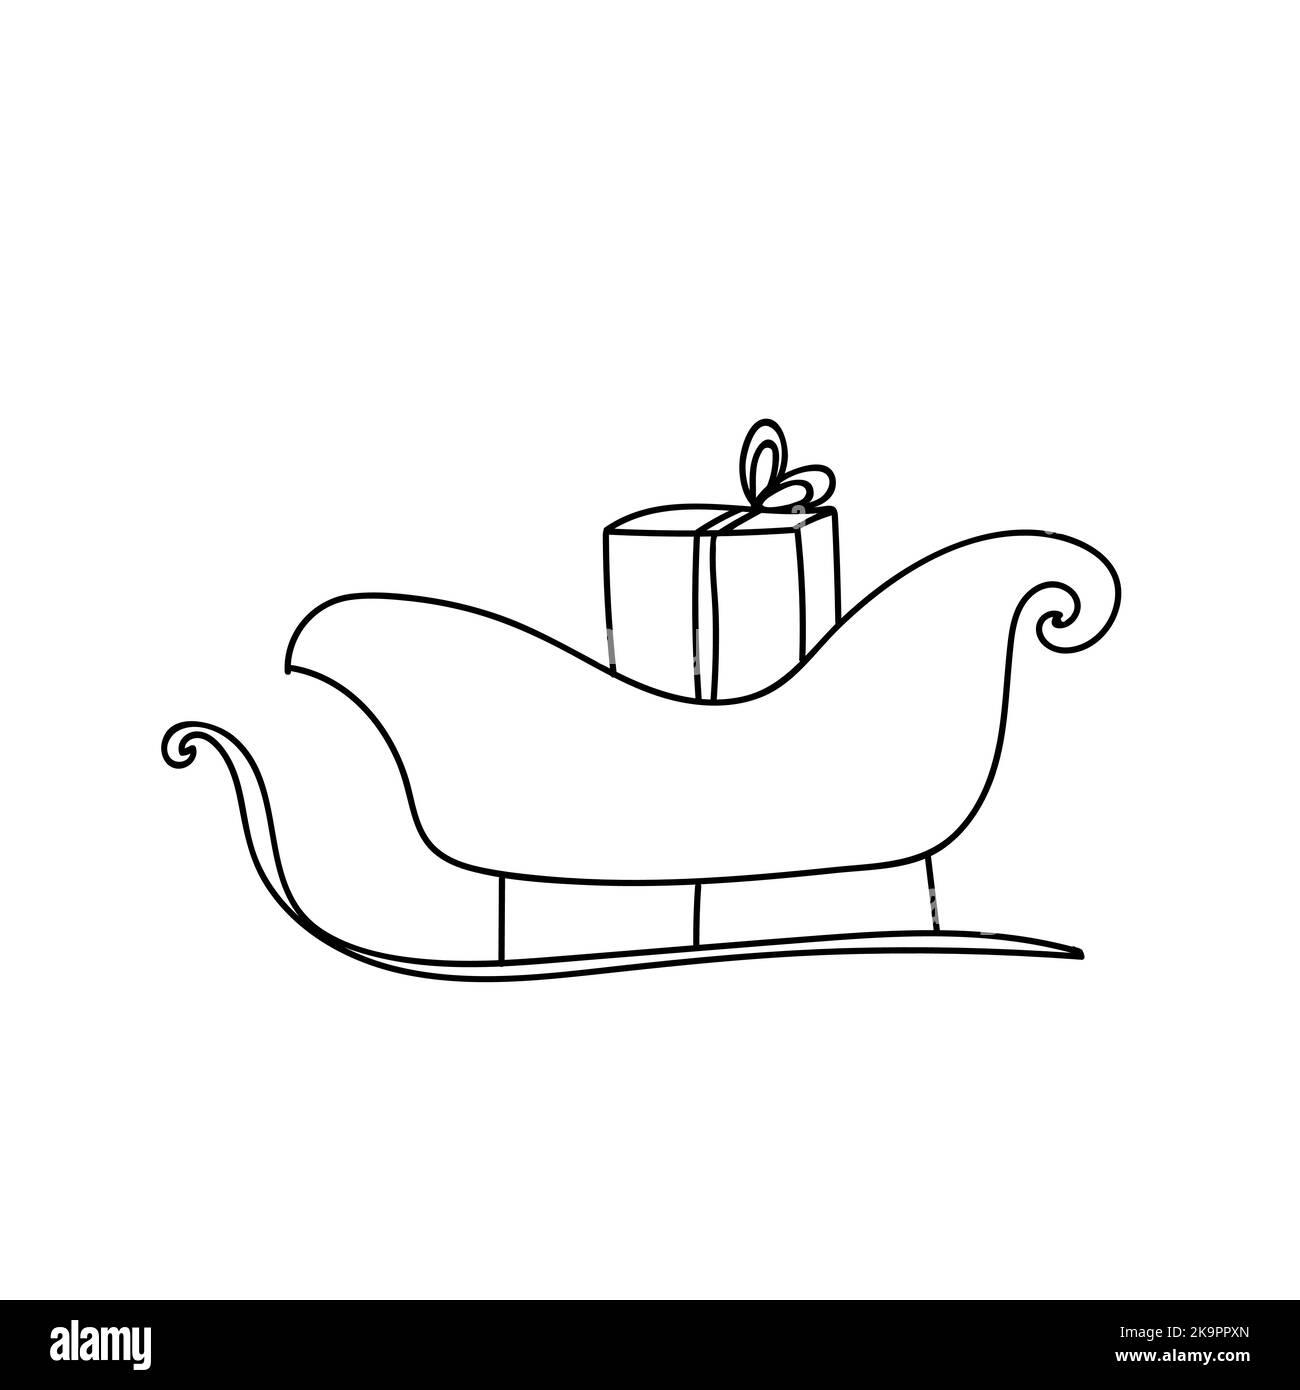 Vector Illustration of a Christmas sleigh with gift box. Coloring book element. Stock Vector